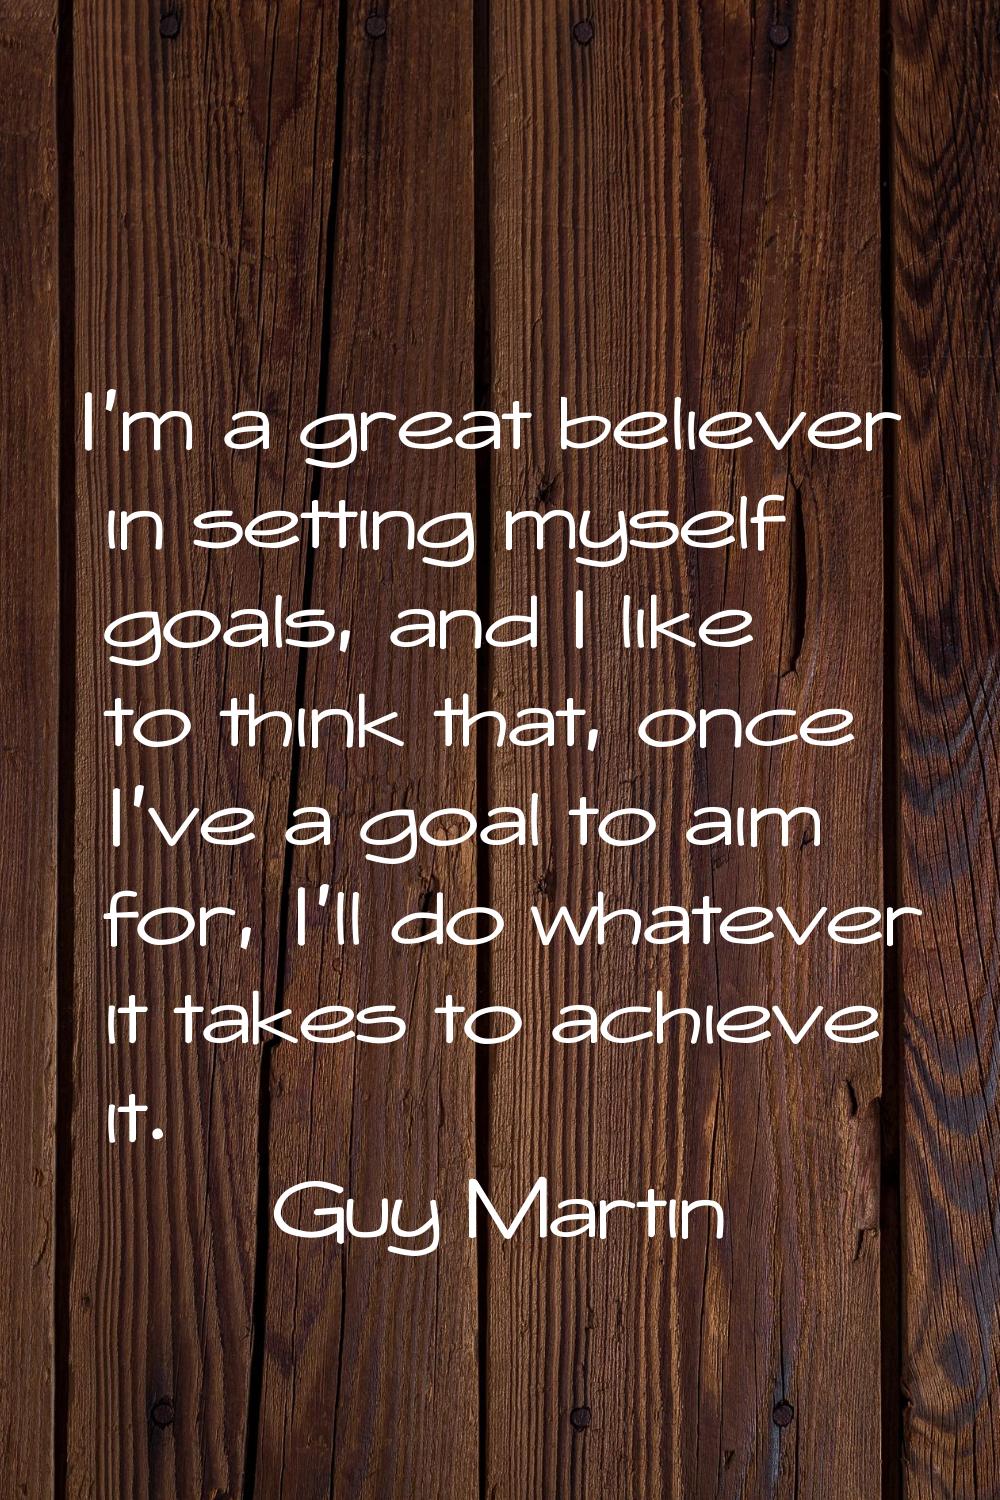 I'm a great believer in setting myself goals, and I like to think that, once I've a goal to aim for